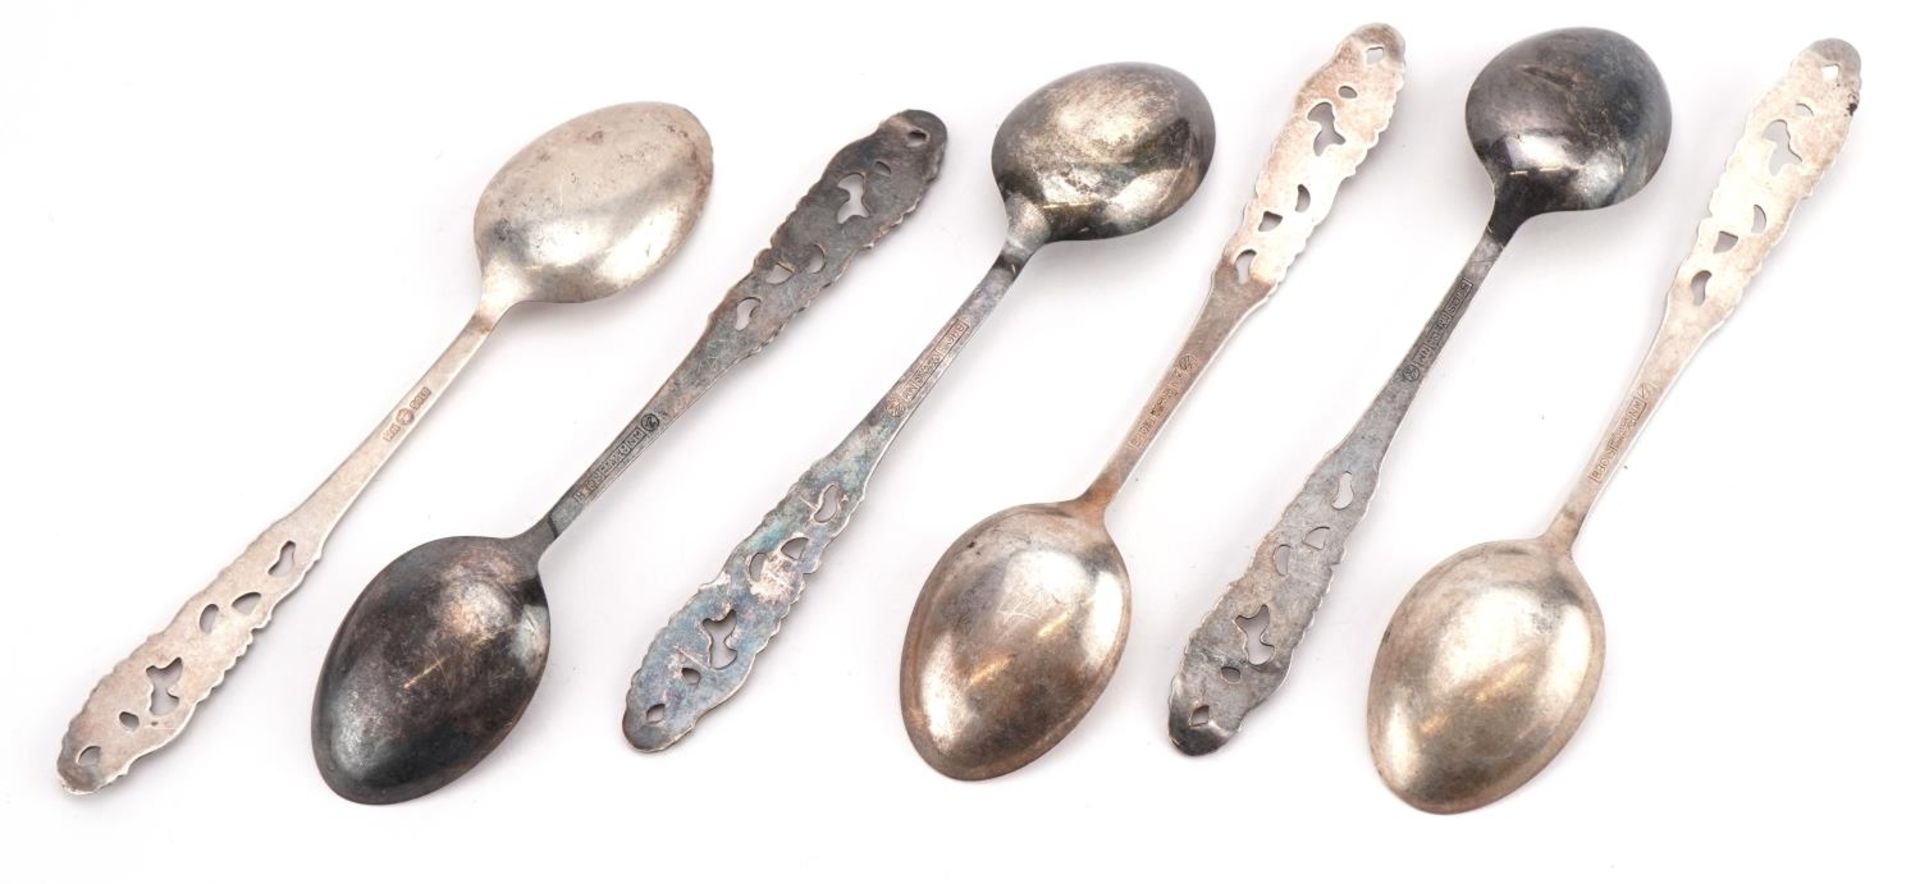 Norwegian 830S silver teaspoons with pierced terminals, 11.5cm in length, 63.0g - Image 2 of 3